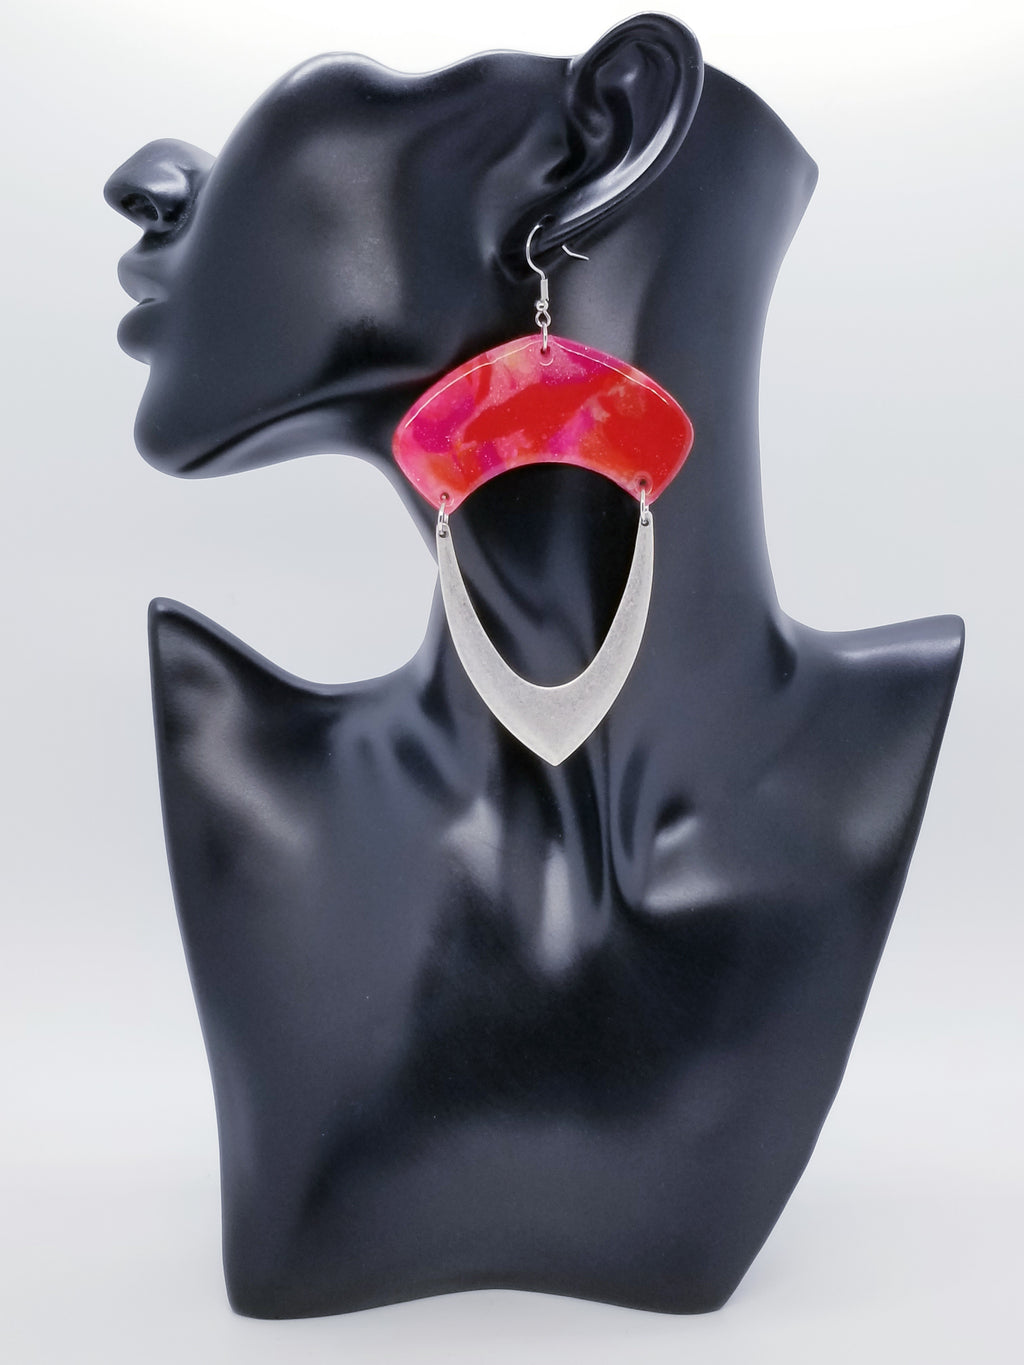 Length: 4.5 inches | Weight: 0.8 ounces   Designed just for you! The earrings are handmade using red pink and swirl gold resin scalloped design, silver brushed arch charm, silver jump rings, silver head pins, and hypoallergenic hooks with back closures. 